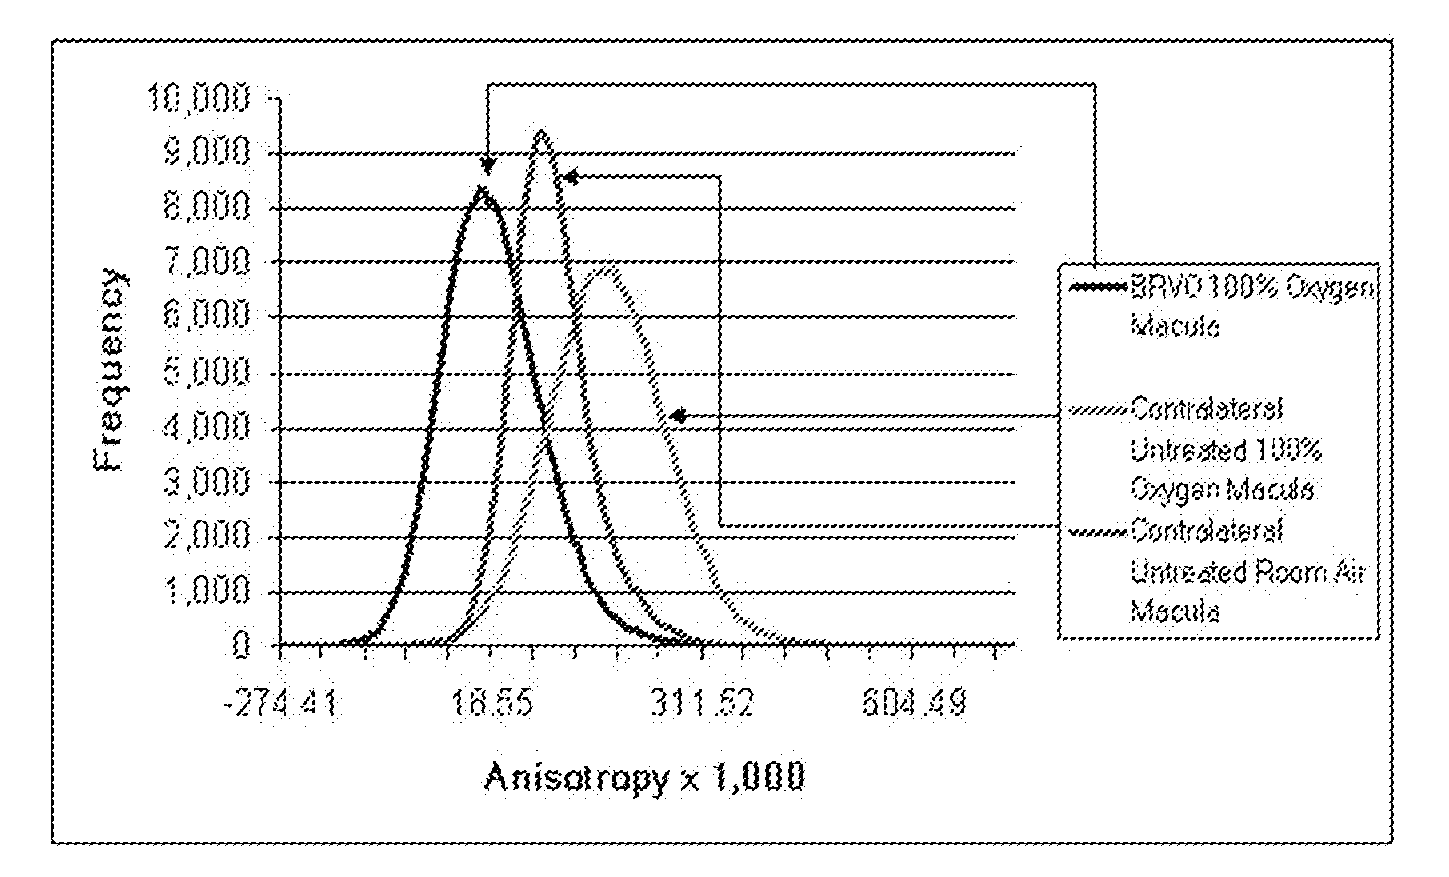 Method and apparatus for the non-invasive measurement of tissue function and metabolism by determination of steady-state fluorescence anisotropy